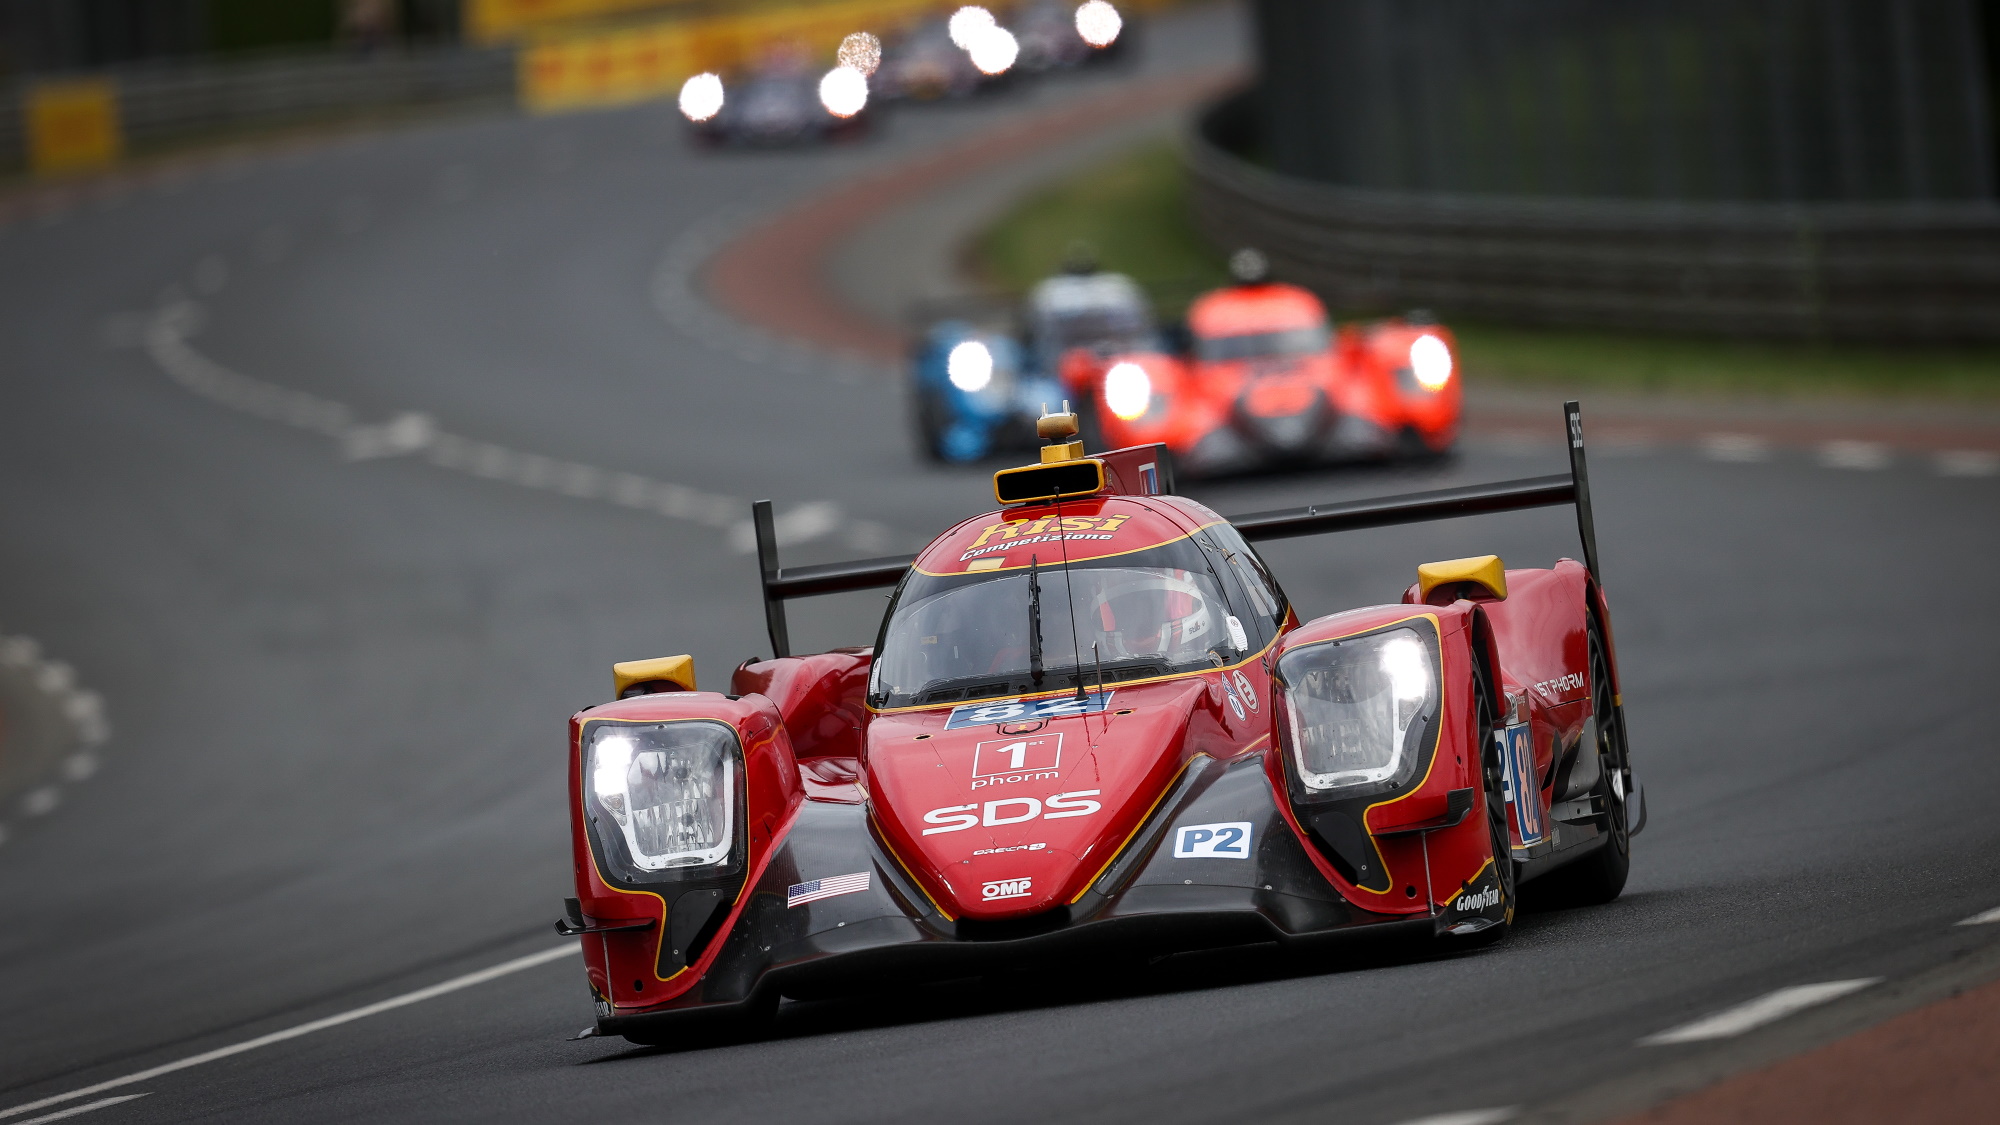 How to watch Le Mans live stream of the 24hour race online from